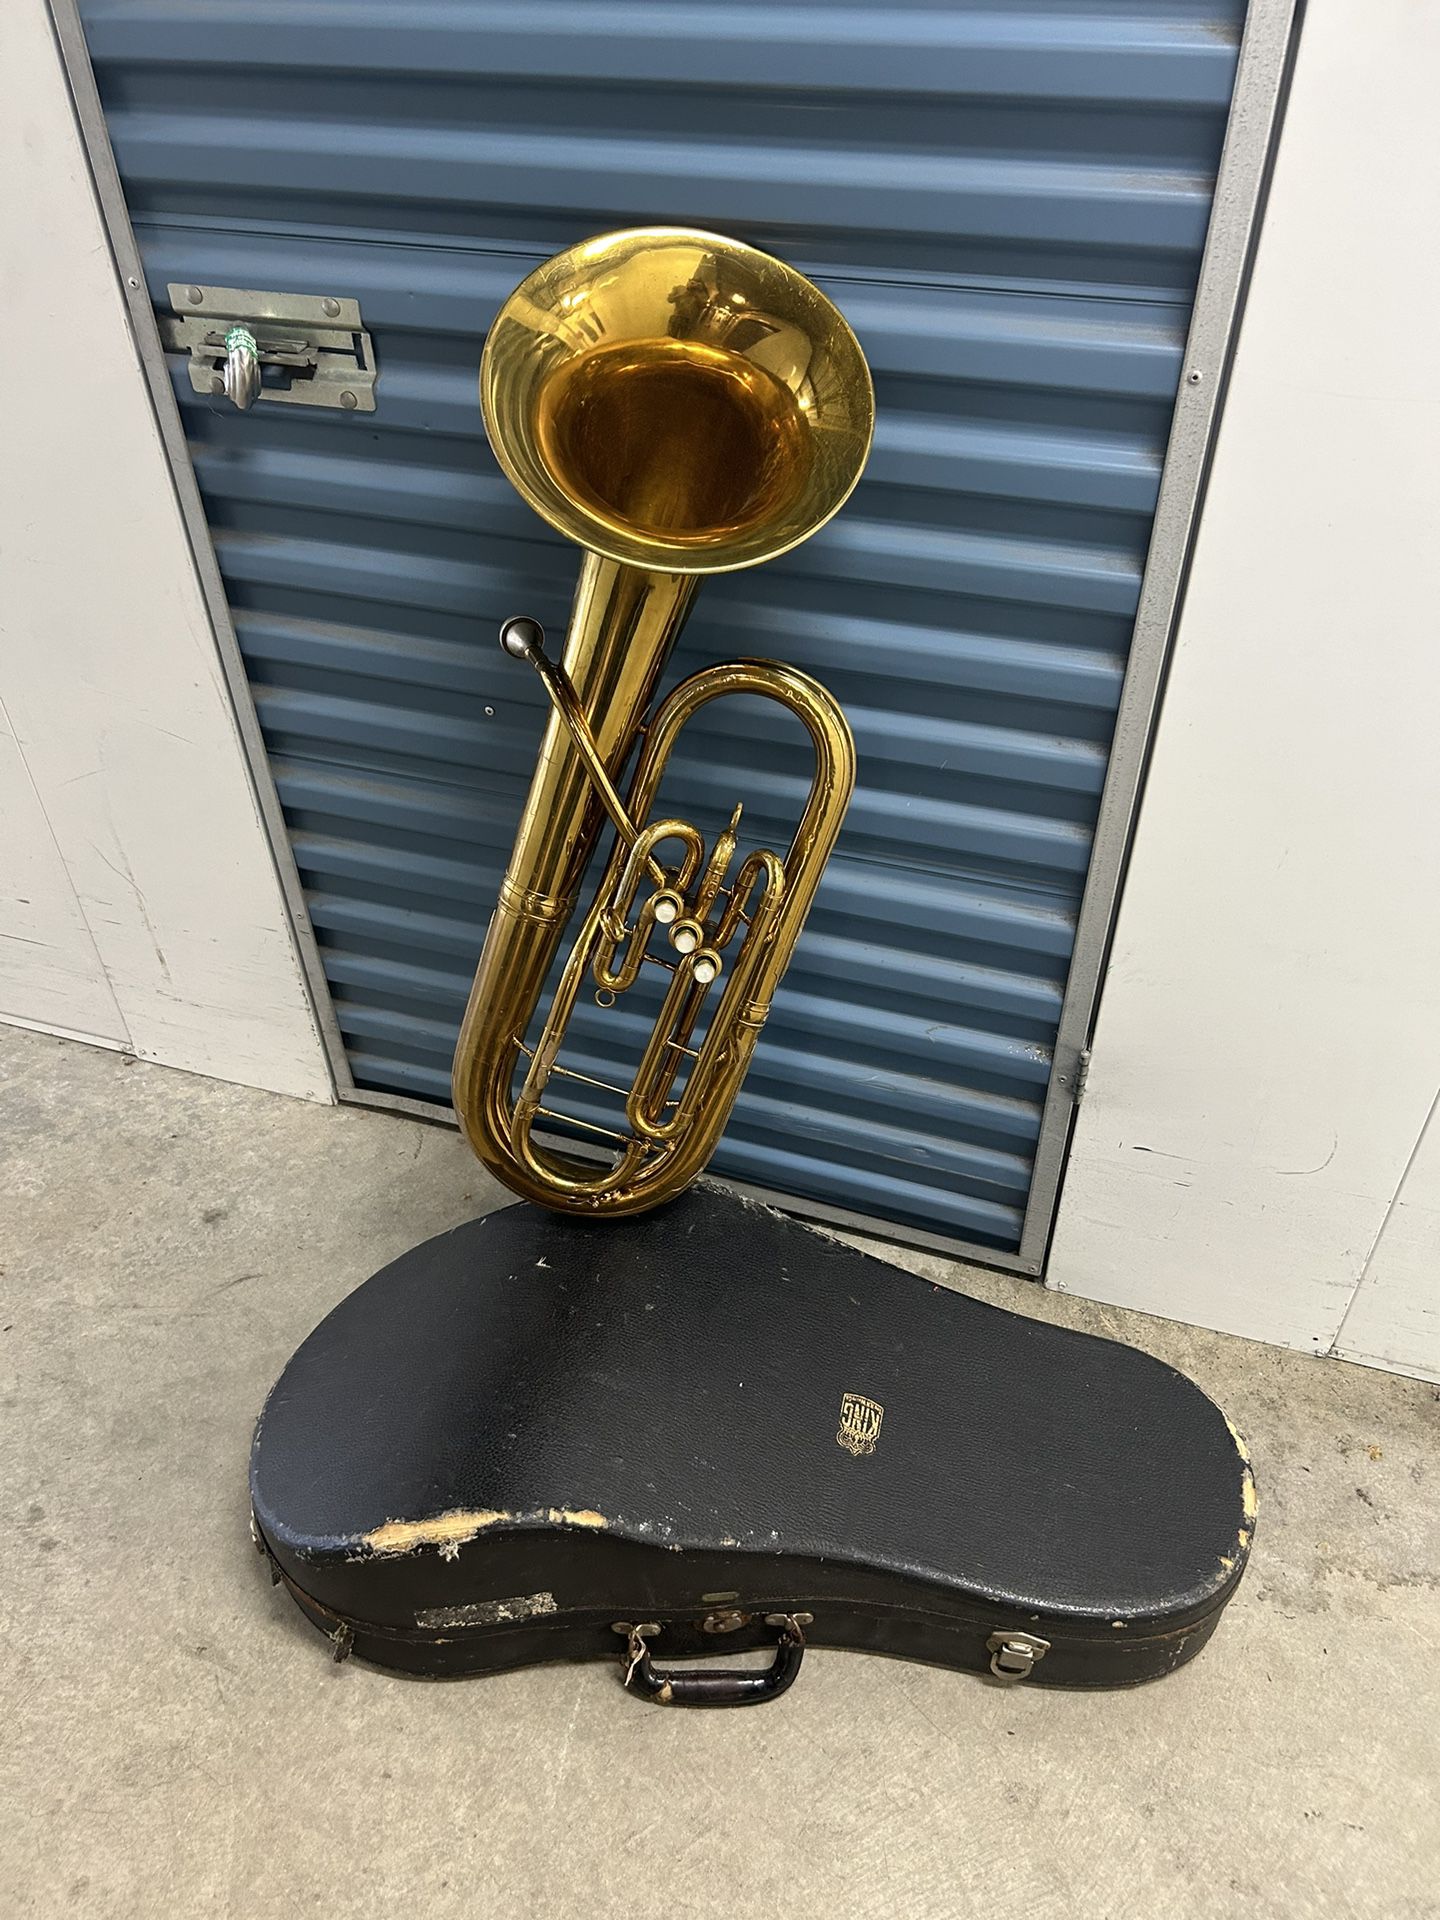 King Baritone Bell Front 1948 Model 1165